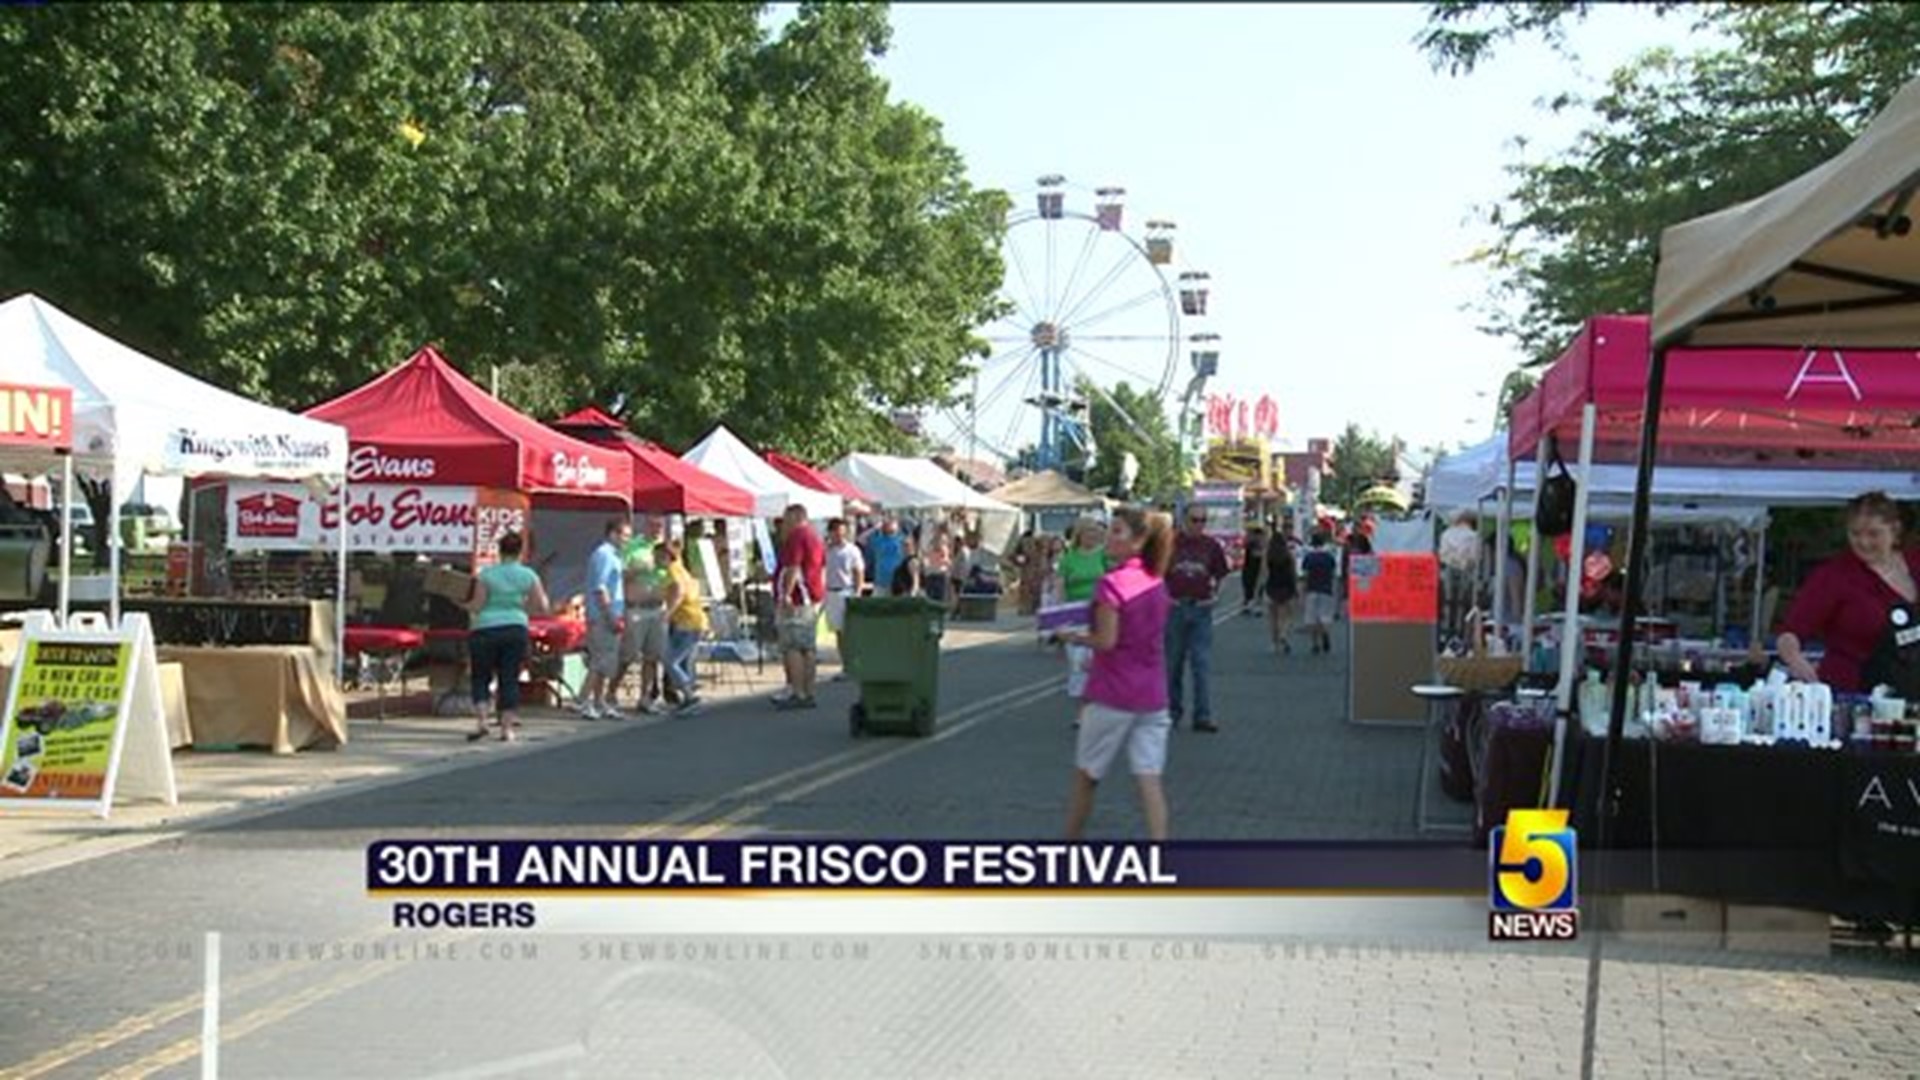 Previewing the 2014 Frisco Festival